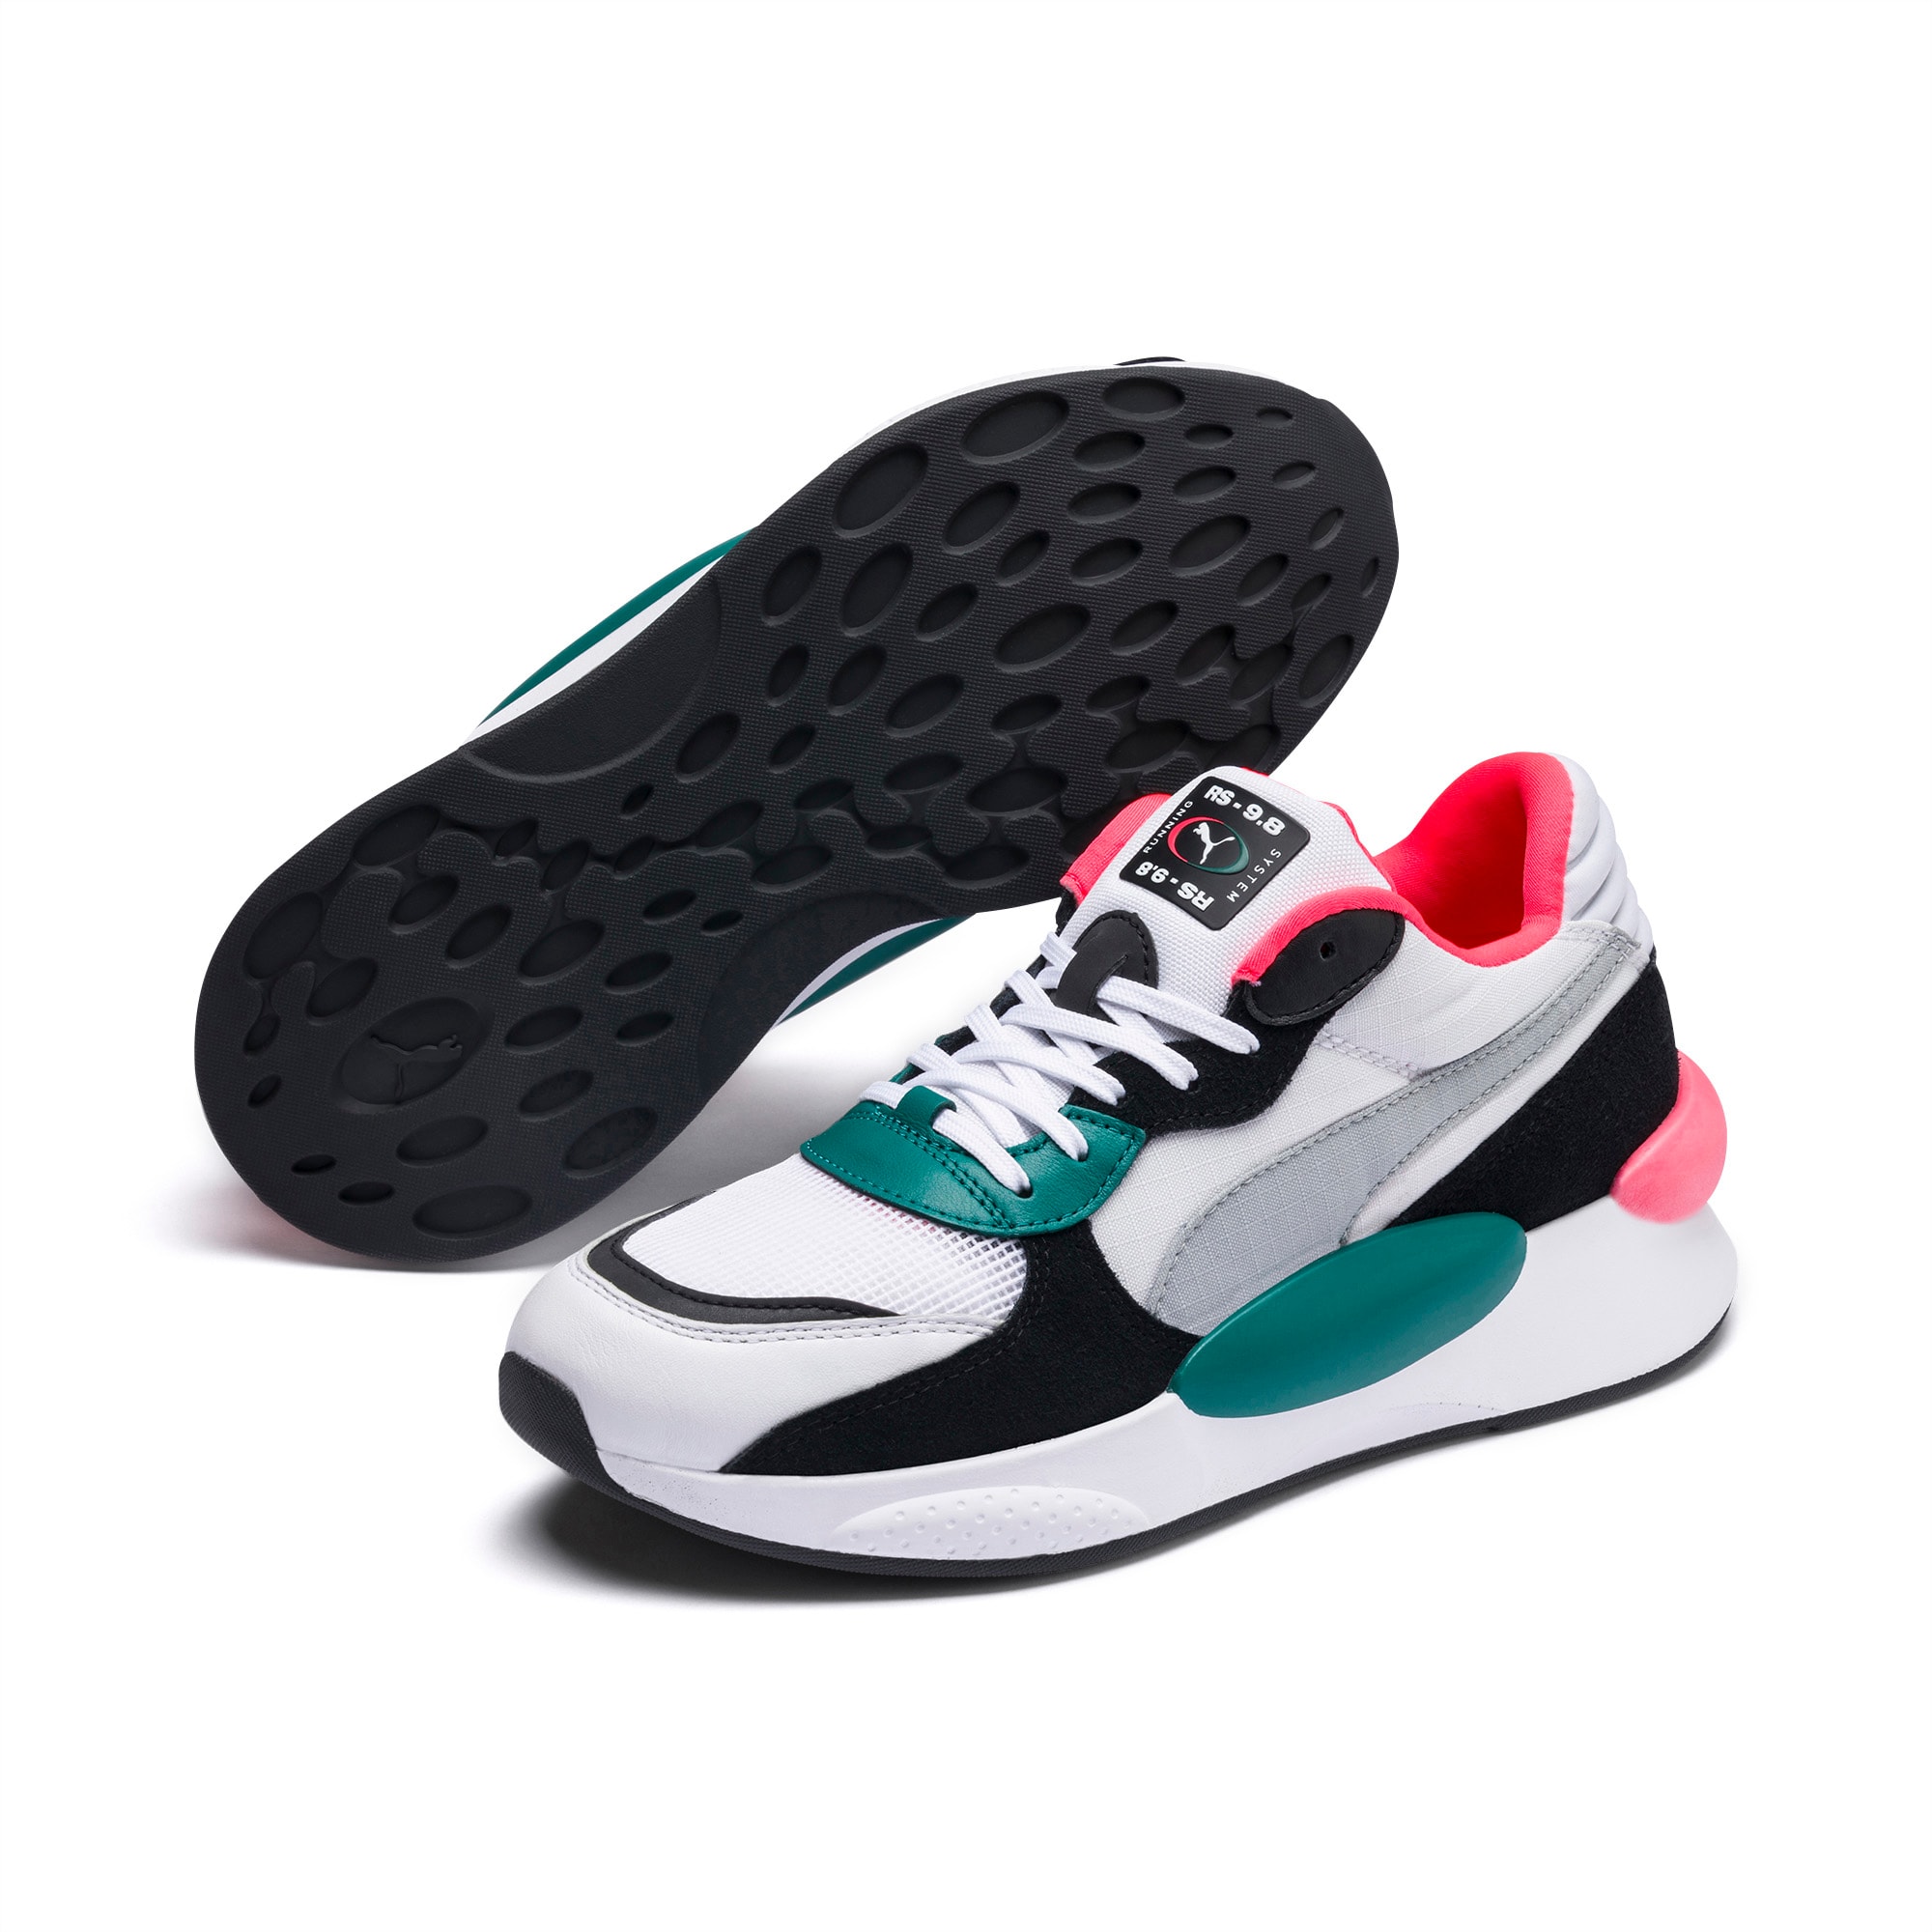 RS 9.8 Space Sneaker | PUMA RS 9.8 Collection | PUMA Deutschland